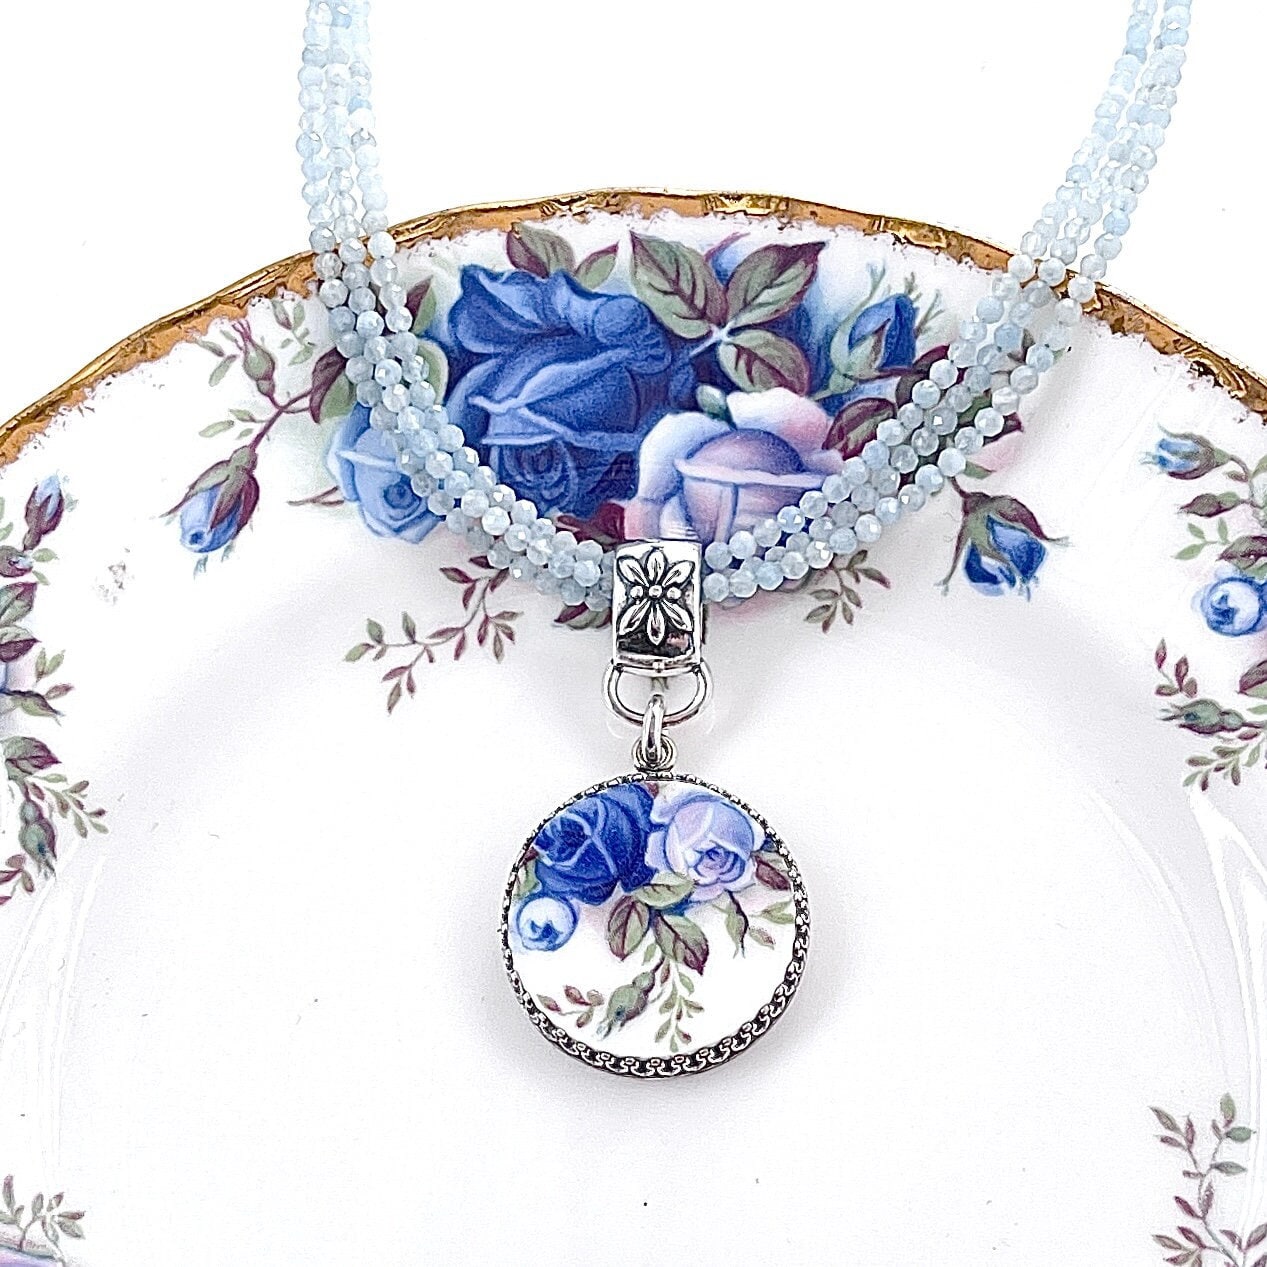 Aquamarine Blue Rose China Necklace, 20th Anniversary Gifts for Wife, Royal Albert Moonlight Rose Broken China Jewelry, Repurposed Jewelry